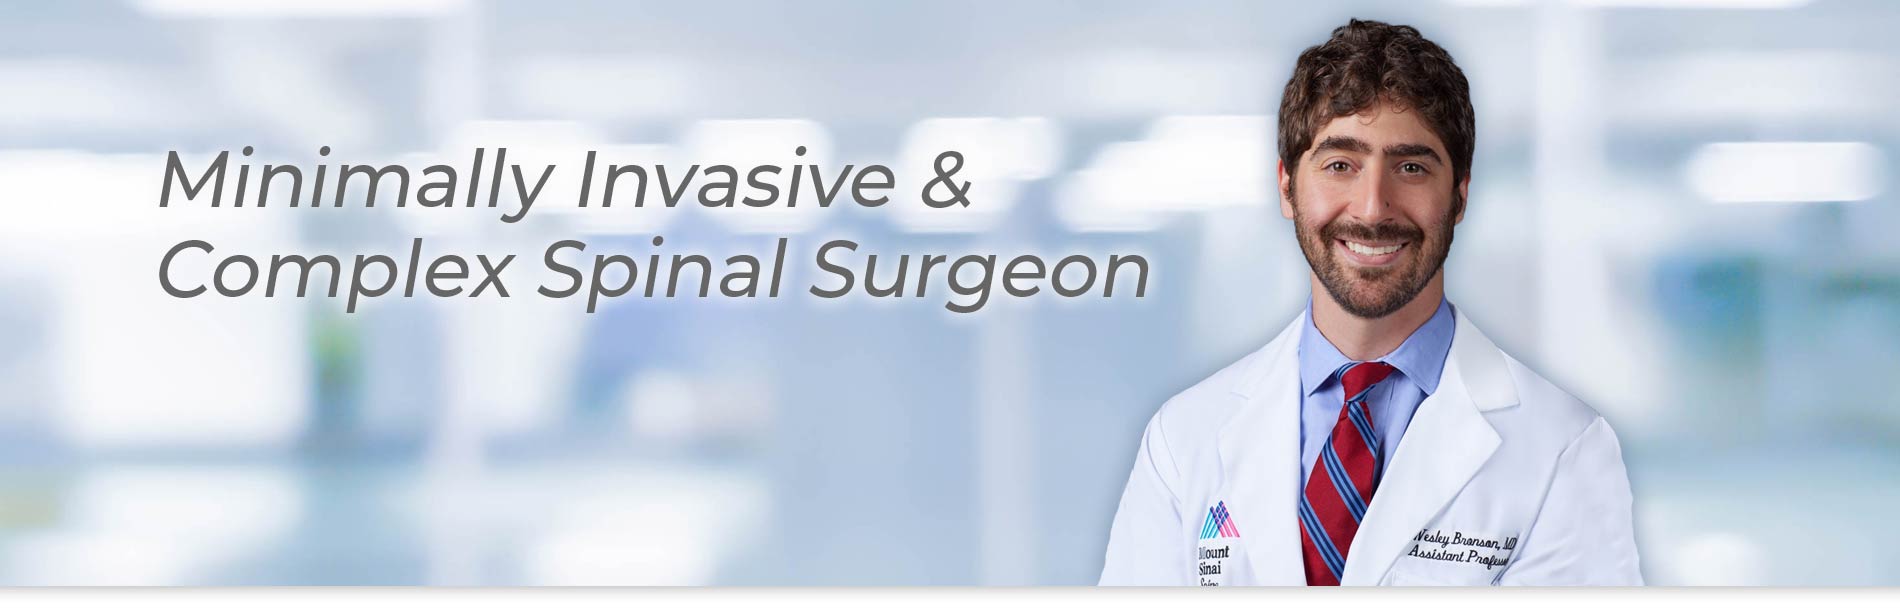 Slide Image for Skilled Orthopedic Surgeon and Spine Specialist